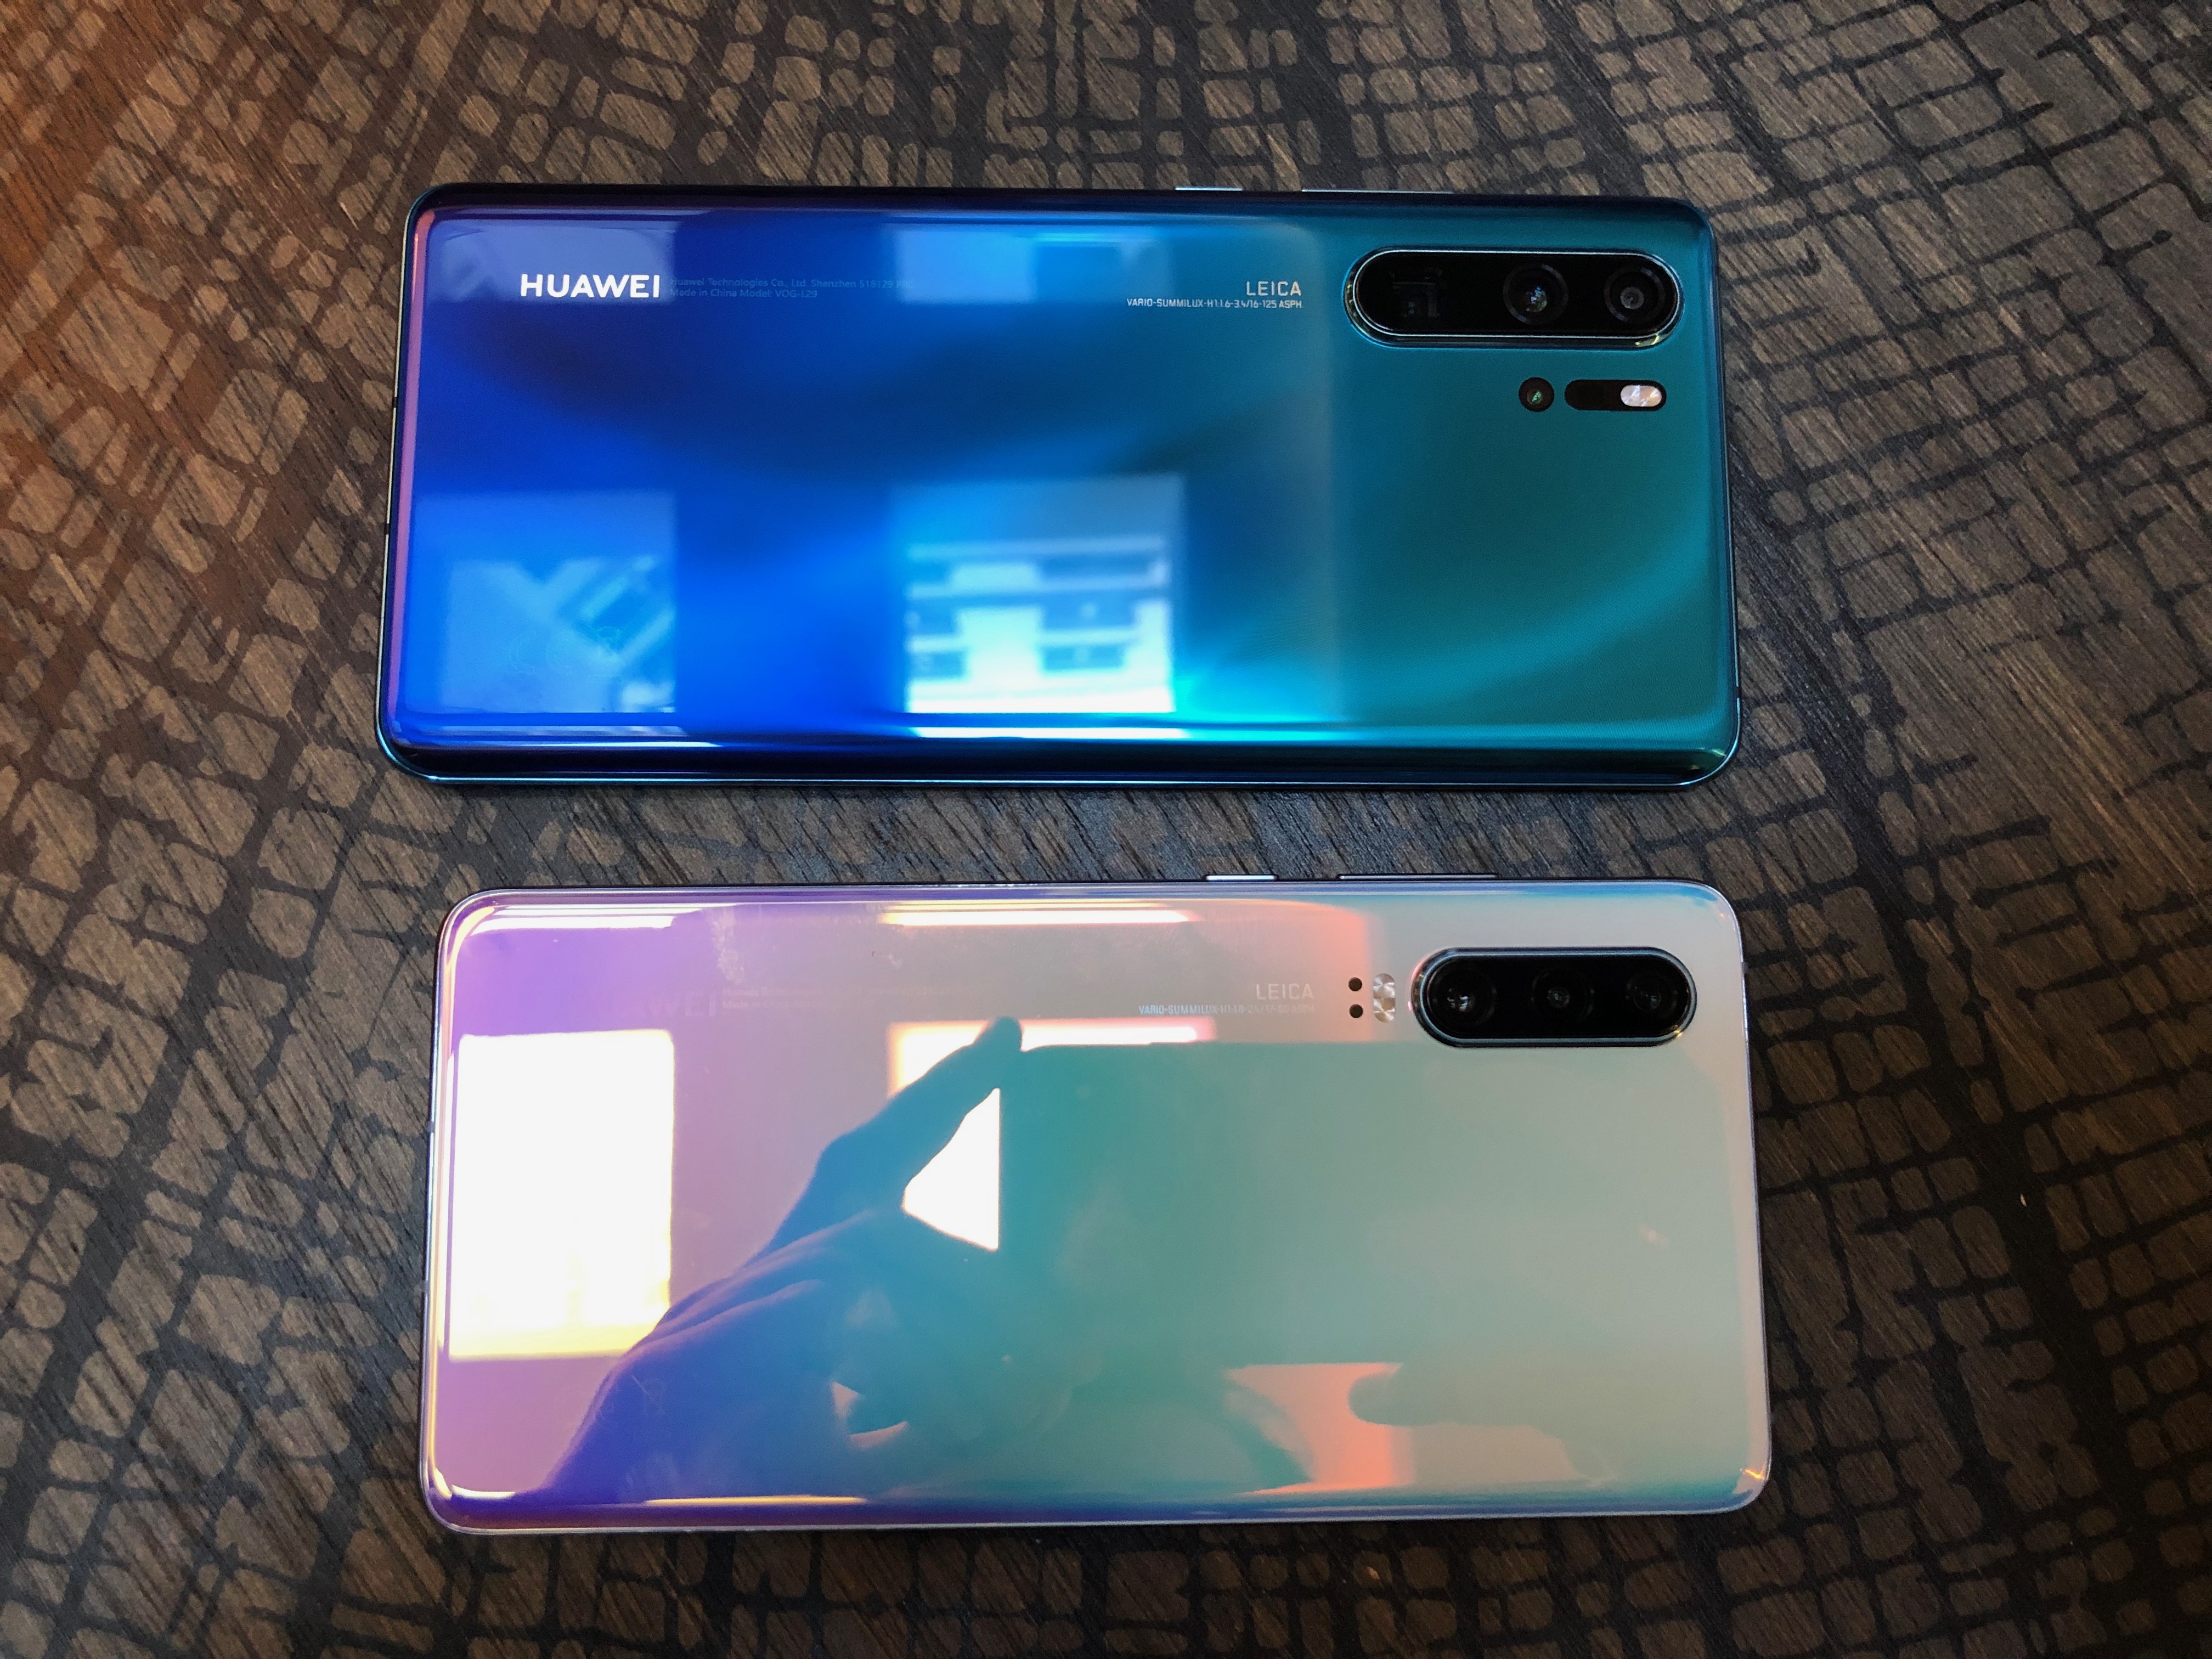 Huawei unveils the P30 and P30 Pro